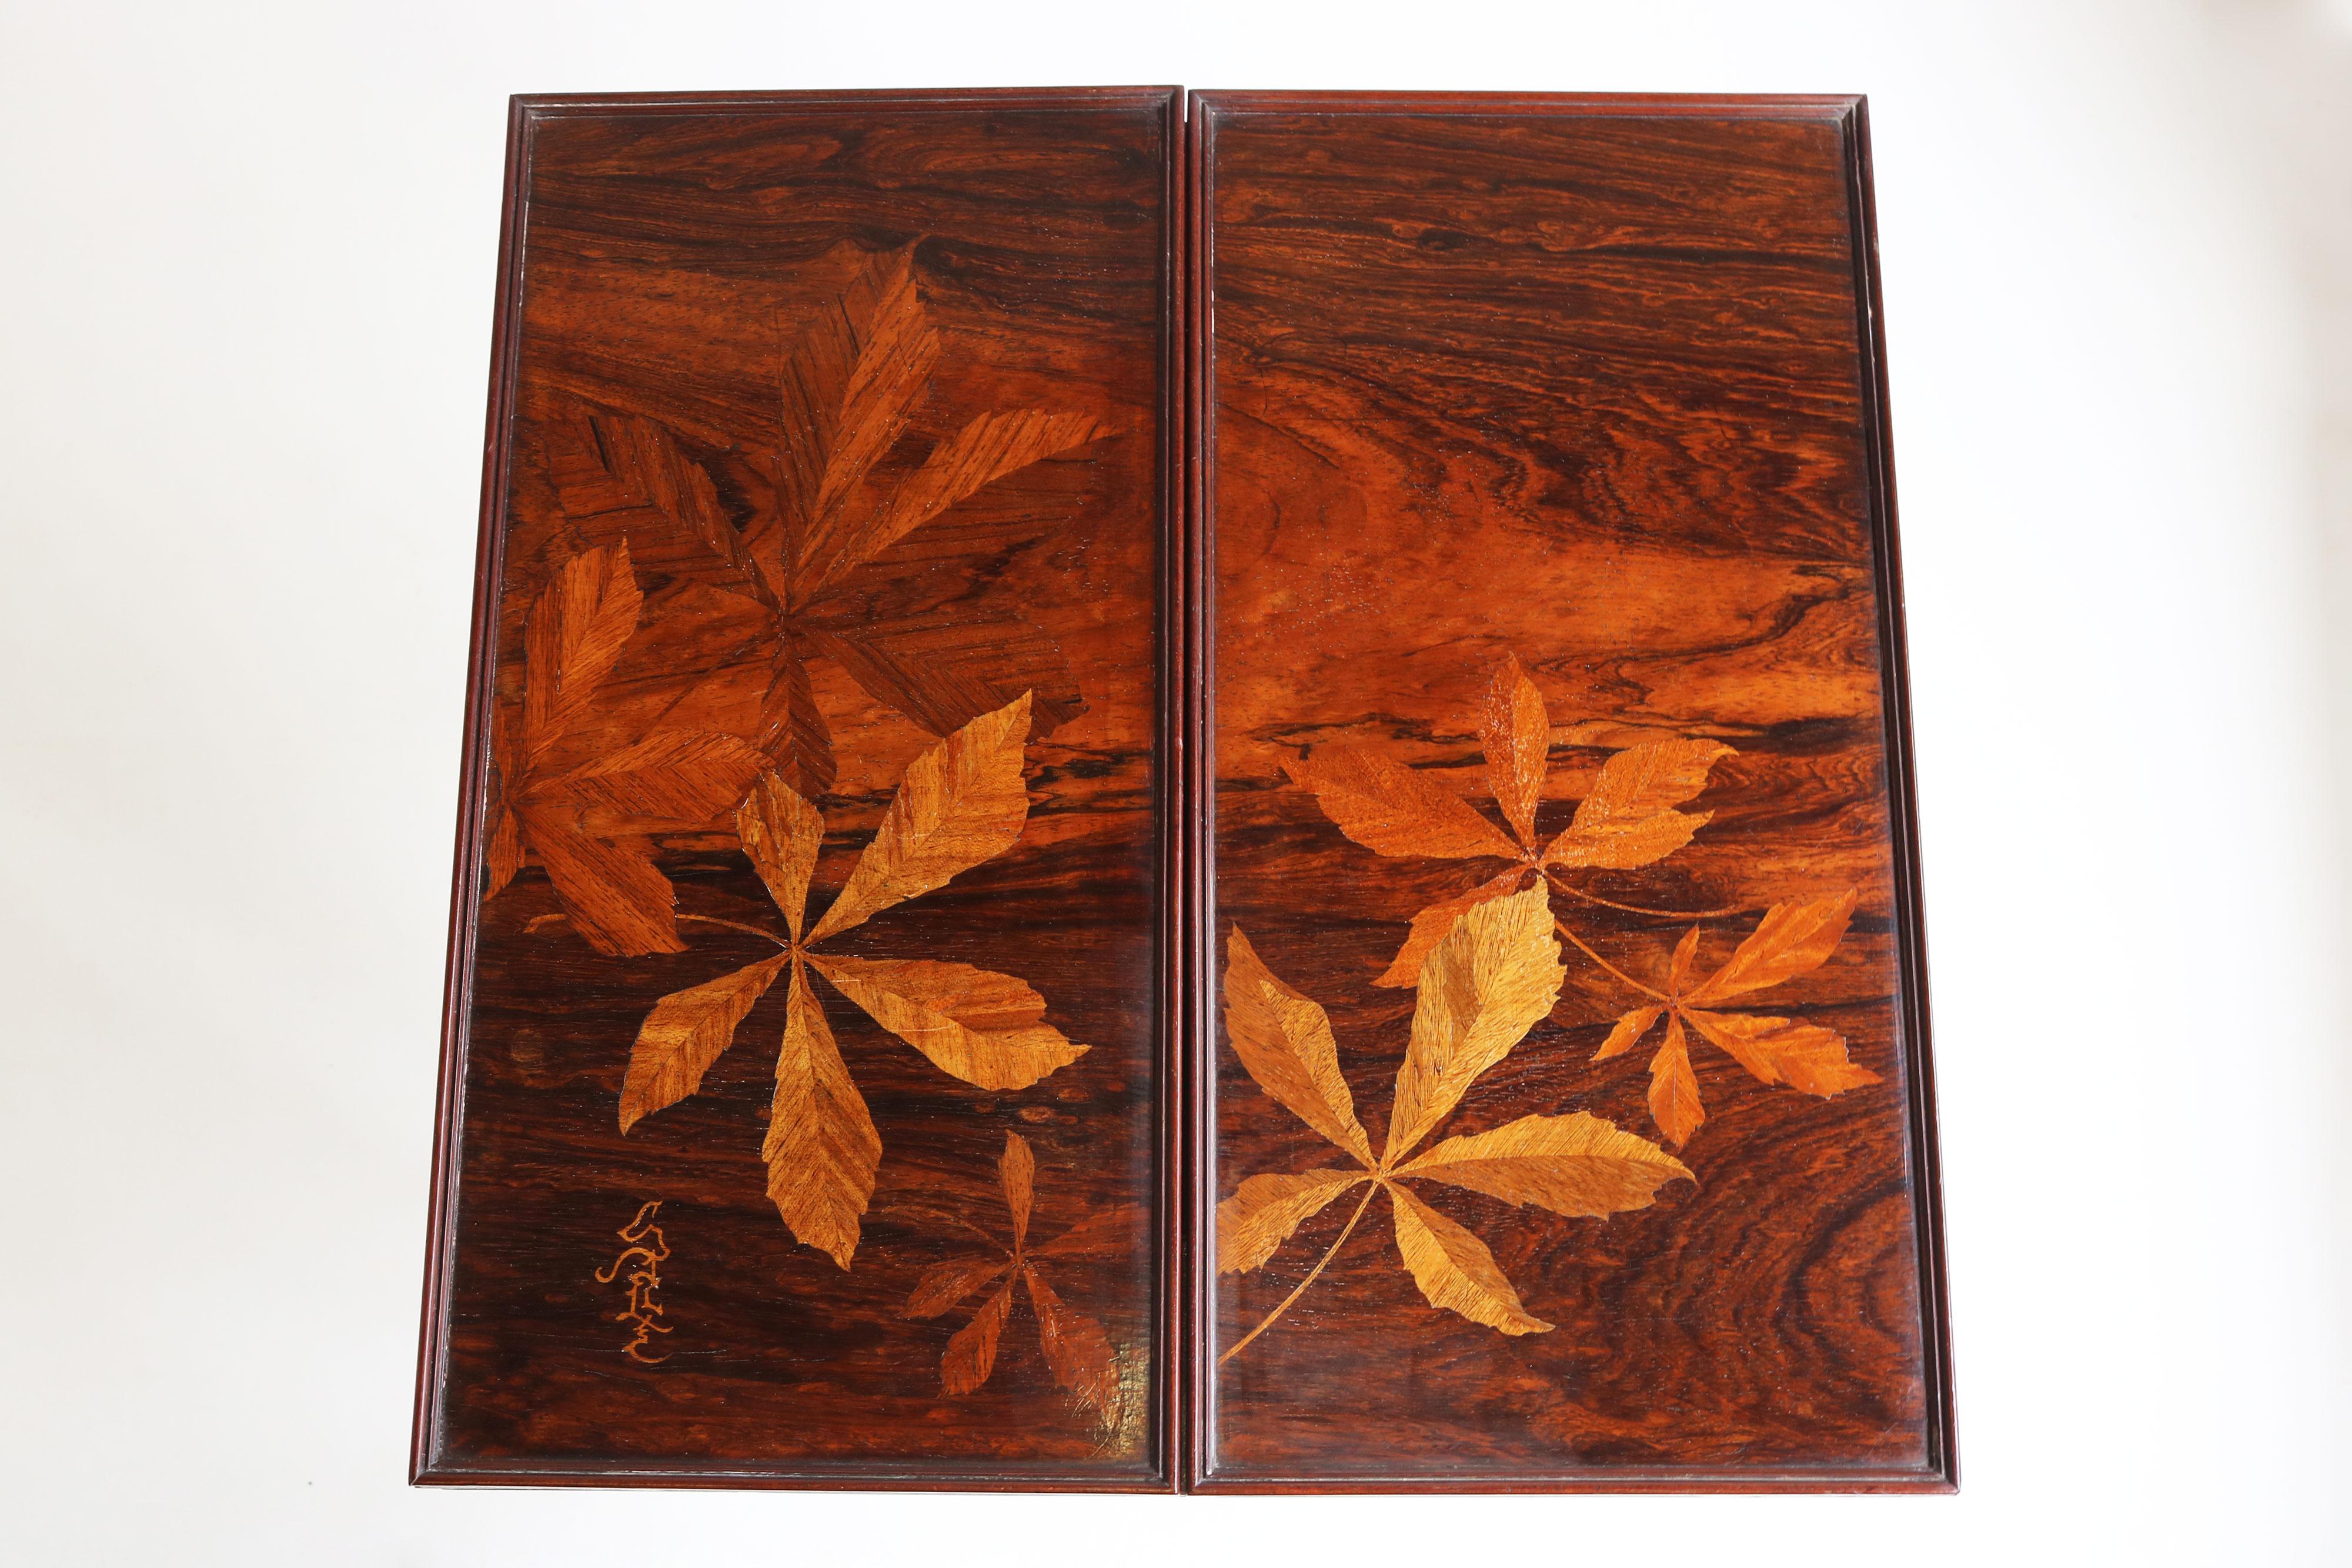 Exquisite & most rare! This marvelous games table by Emile Galle. The top is richly decorated with a masterfully inlay of various woods. Depicting multiple chestnut leaves in different colors. 
The top is signed Galle in inlaid wood made in